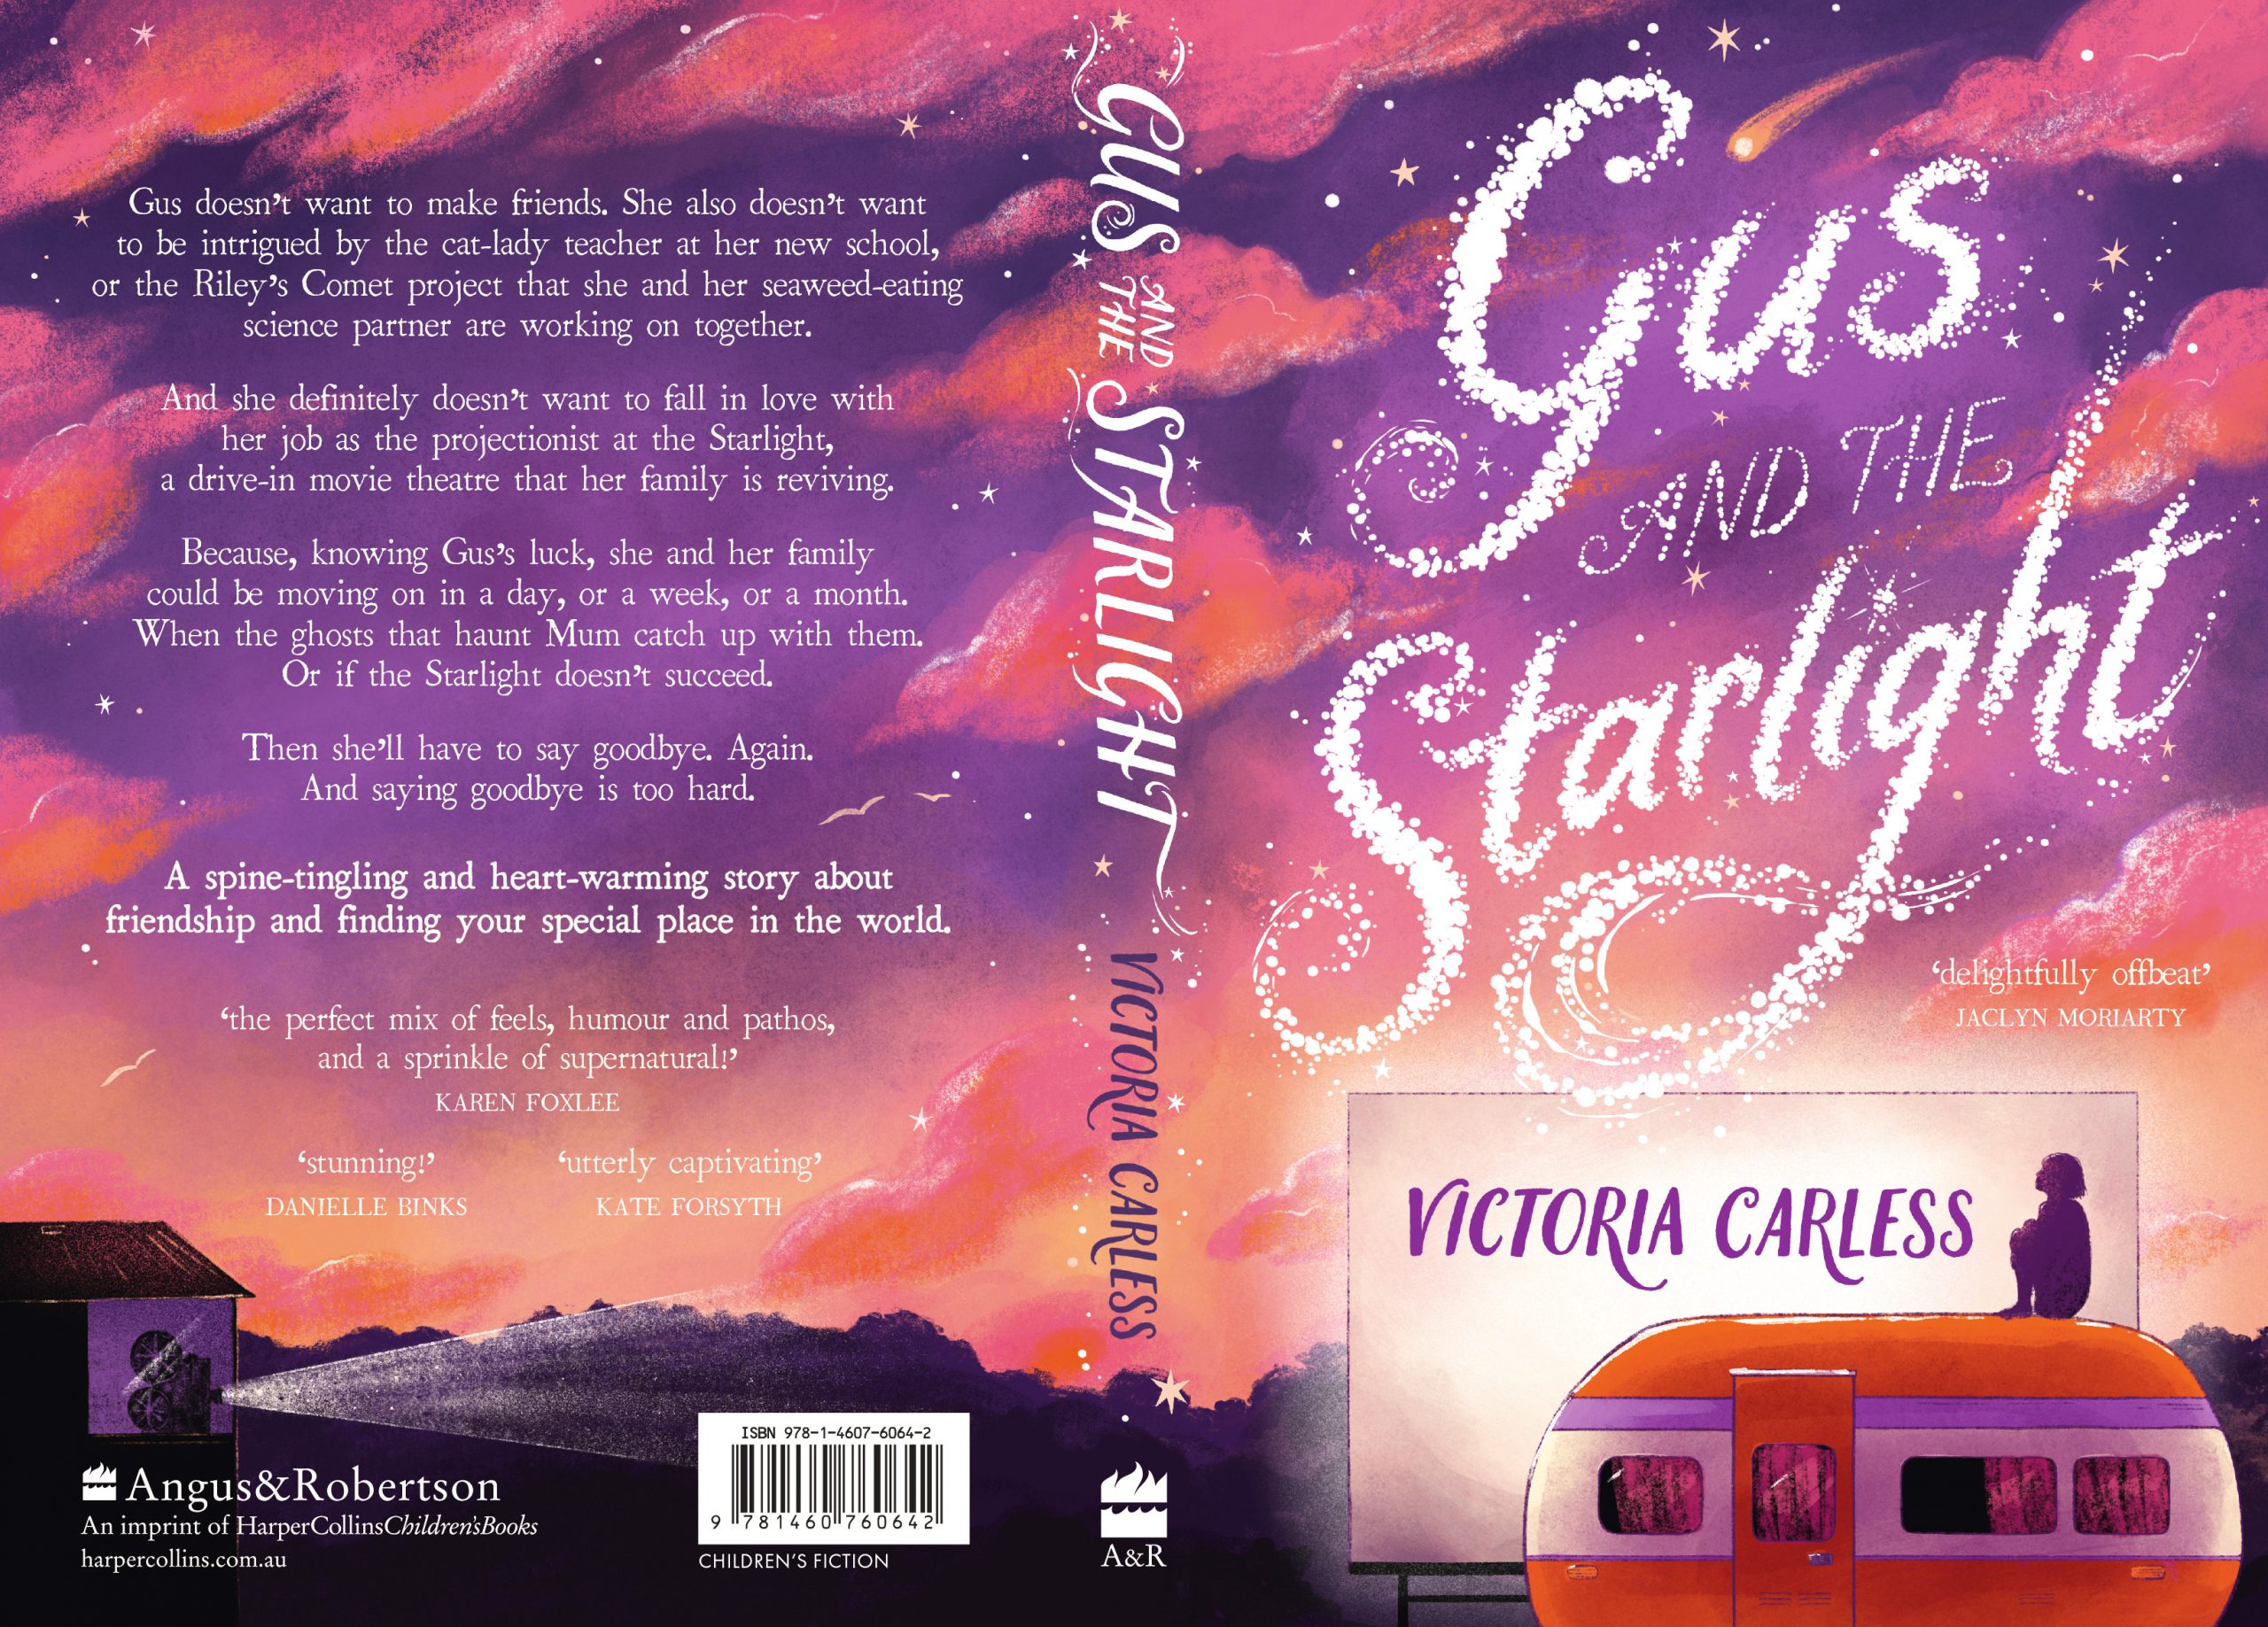 Full jacket art for Gus and the Starlight